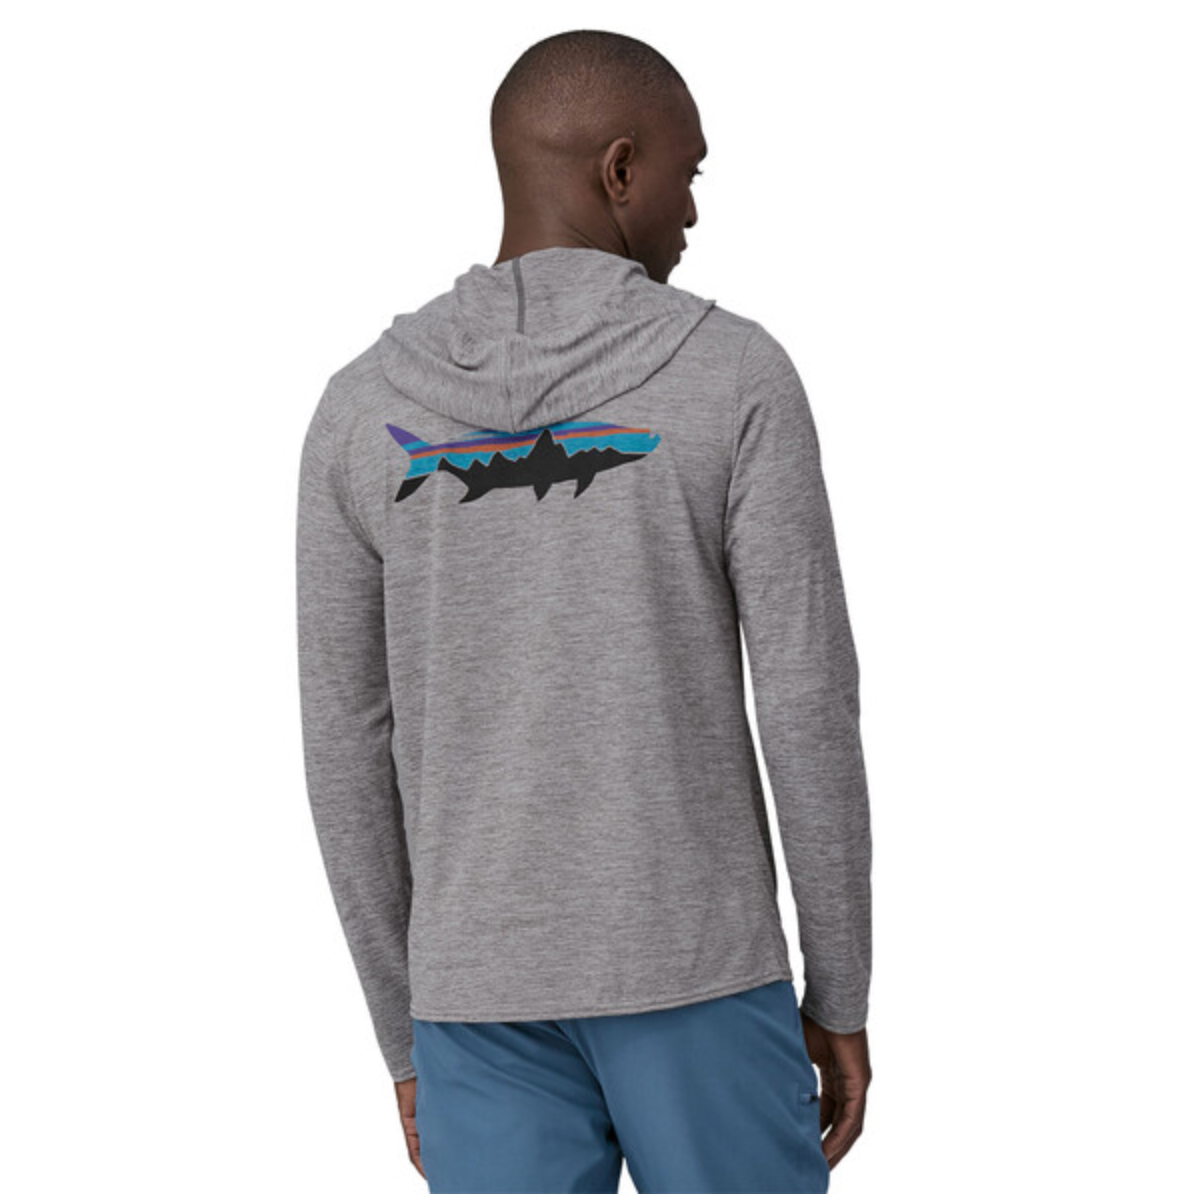 Patagonia Men's Capilene Cool Daily Graphic Hoody - Fitz Roy Tarpon: Feather Grey